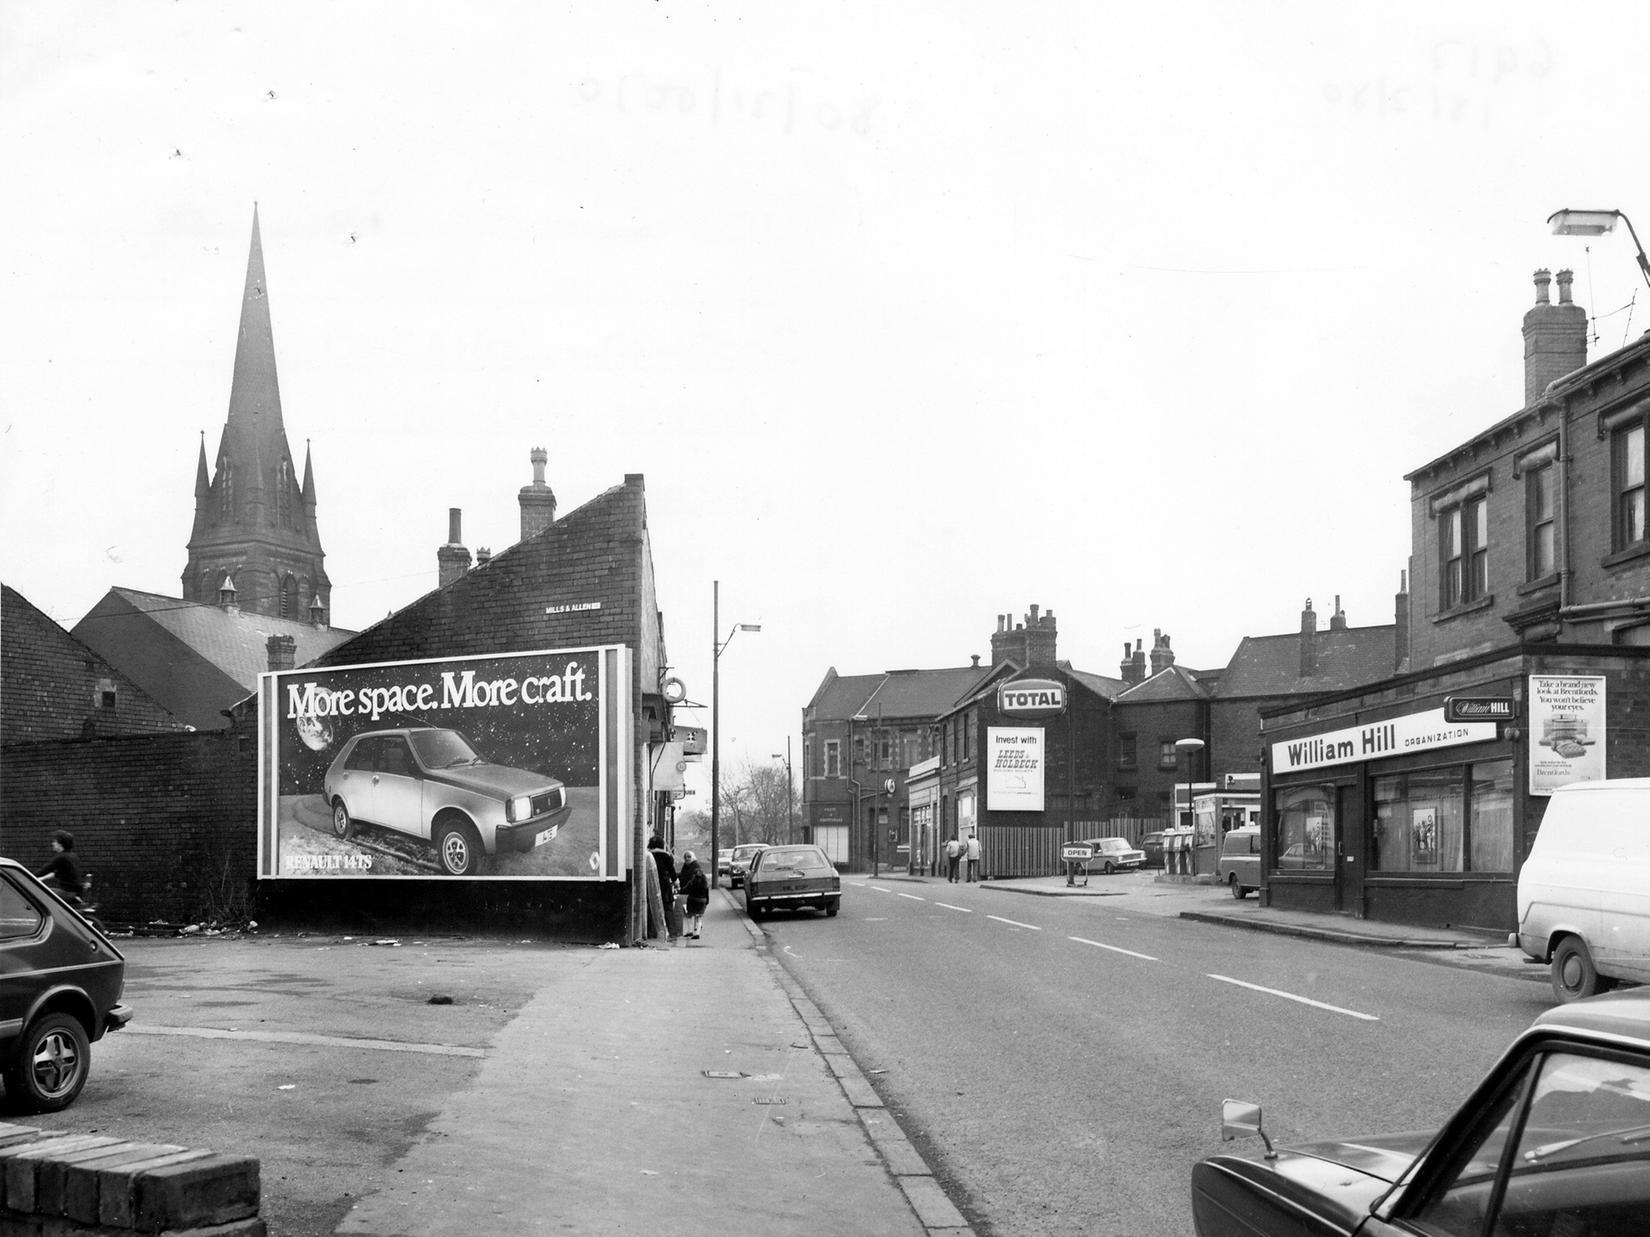 Domestic Street in Holbeck. On right is William Hill, bookmakers, next is a petrol station. Advertising hoardings can be seen, including for Renault cars and the Leeds & Holbeck Building Society, which is further along the road.